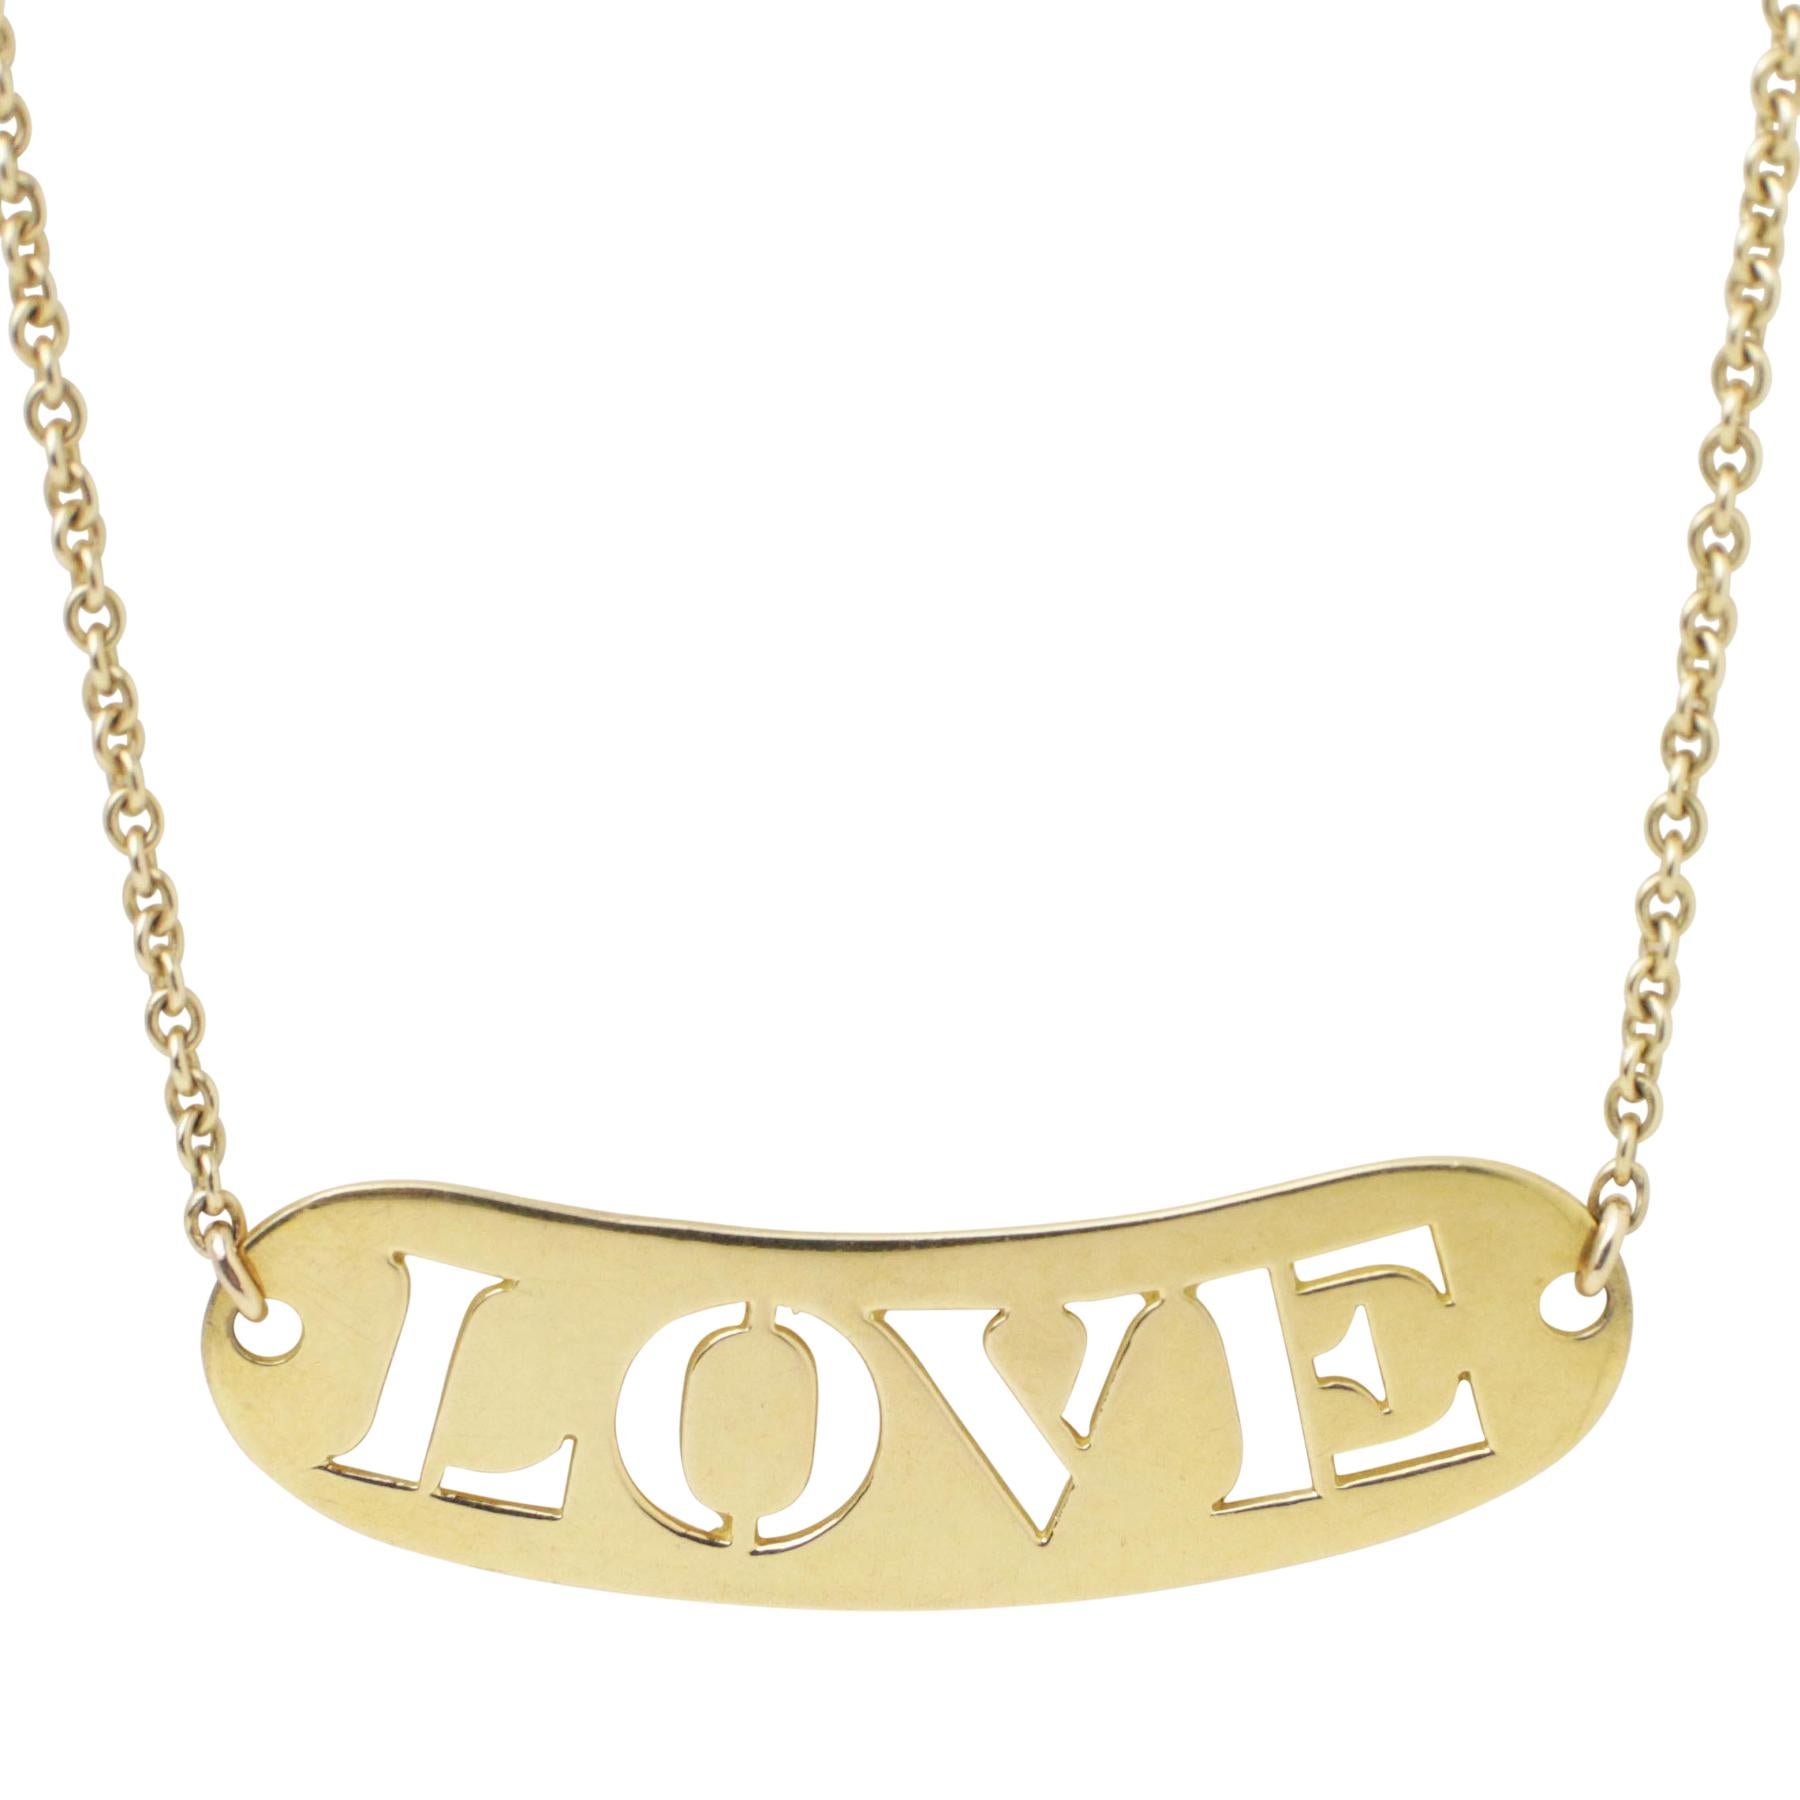 Gold & French, two words that conjure up luxury and style. This 18k yellow gold Love pendant is wearable everyday, perfect on its own or layered with other pieces. The word love is stamped out of a rounded piece of gold, with a lovely fine link